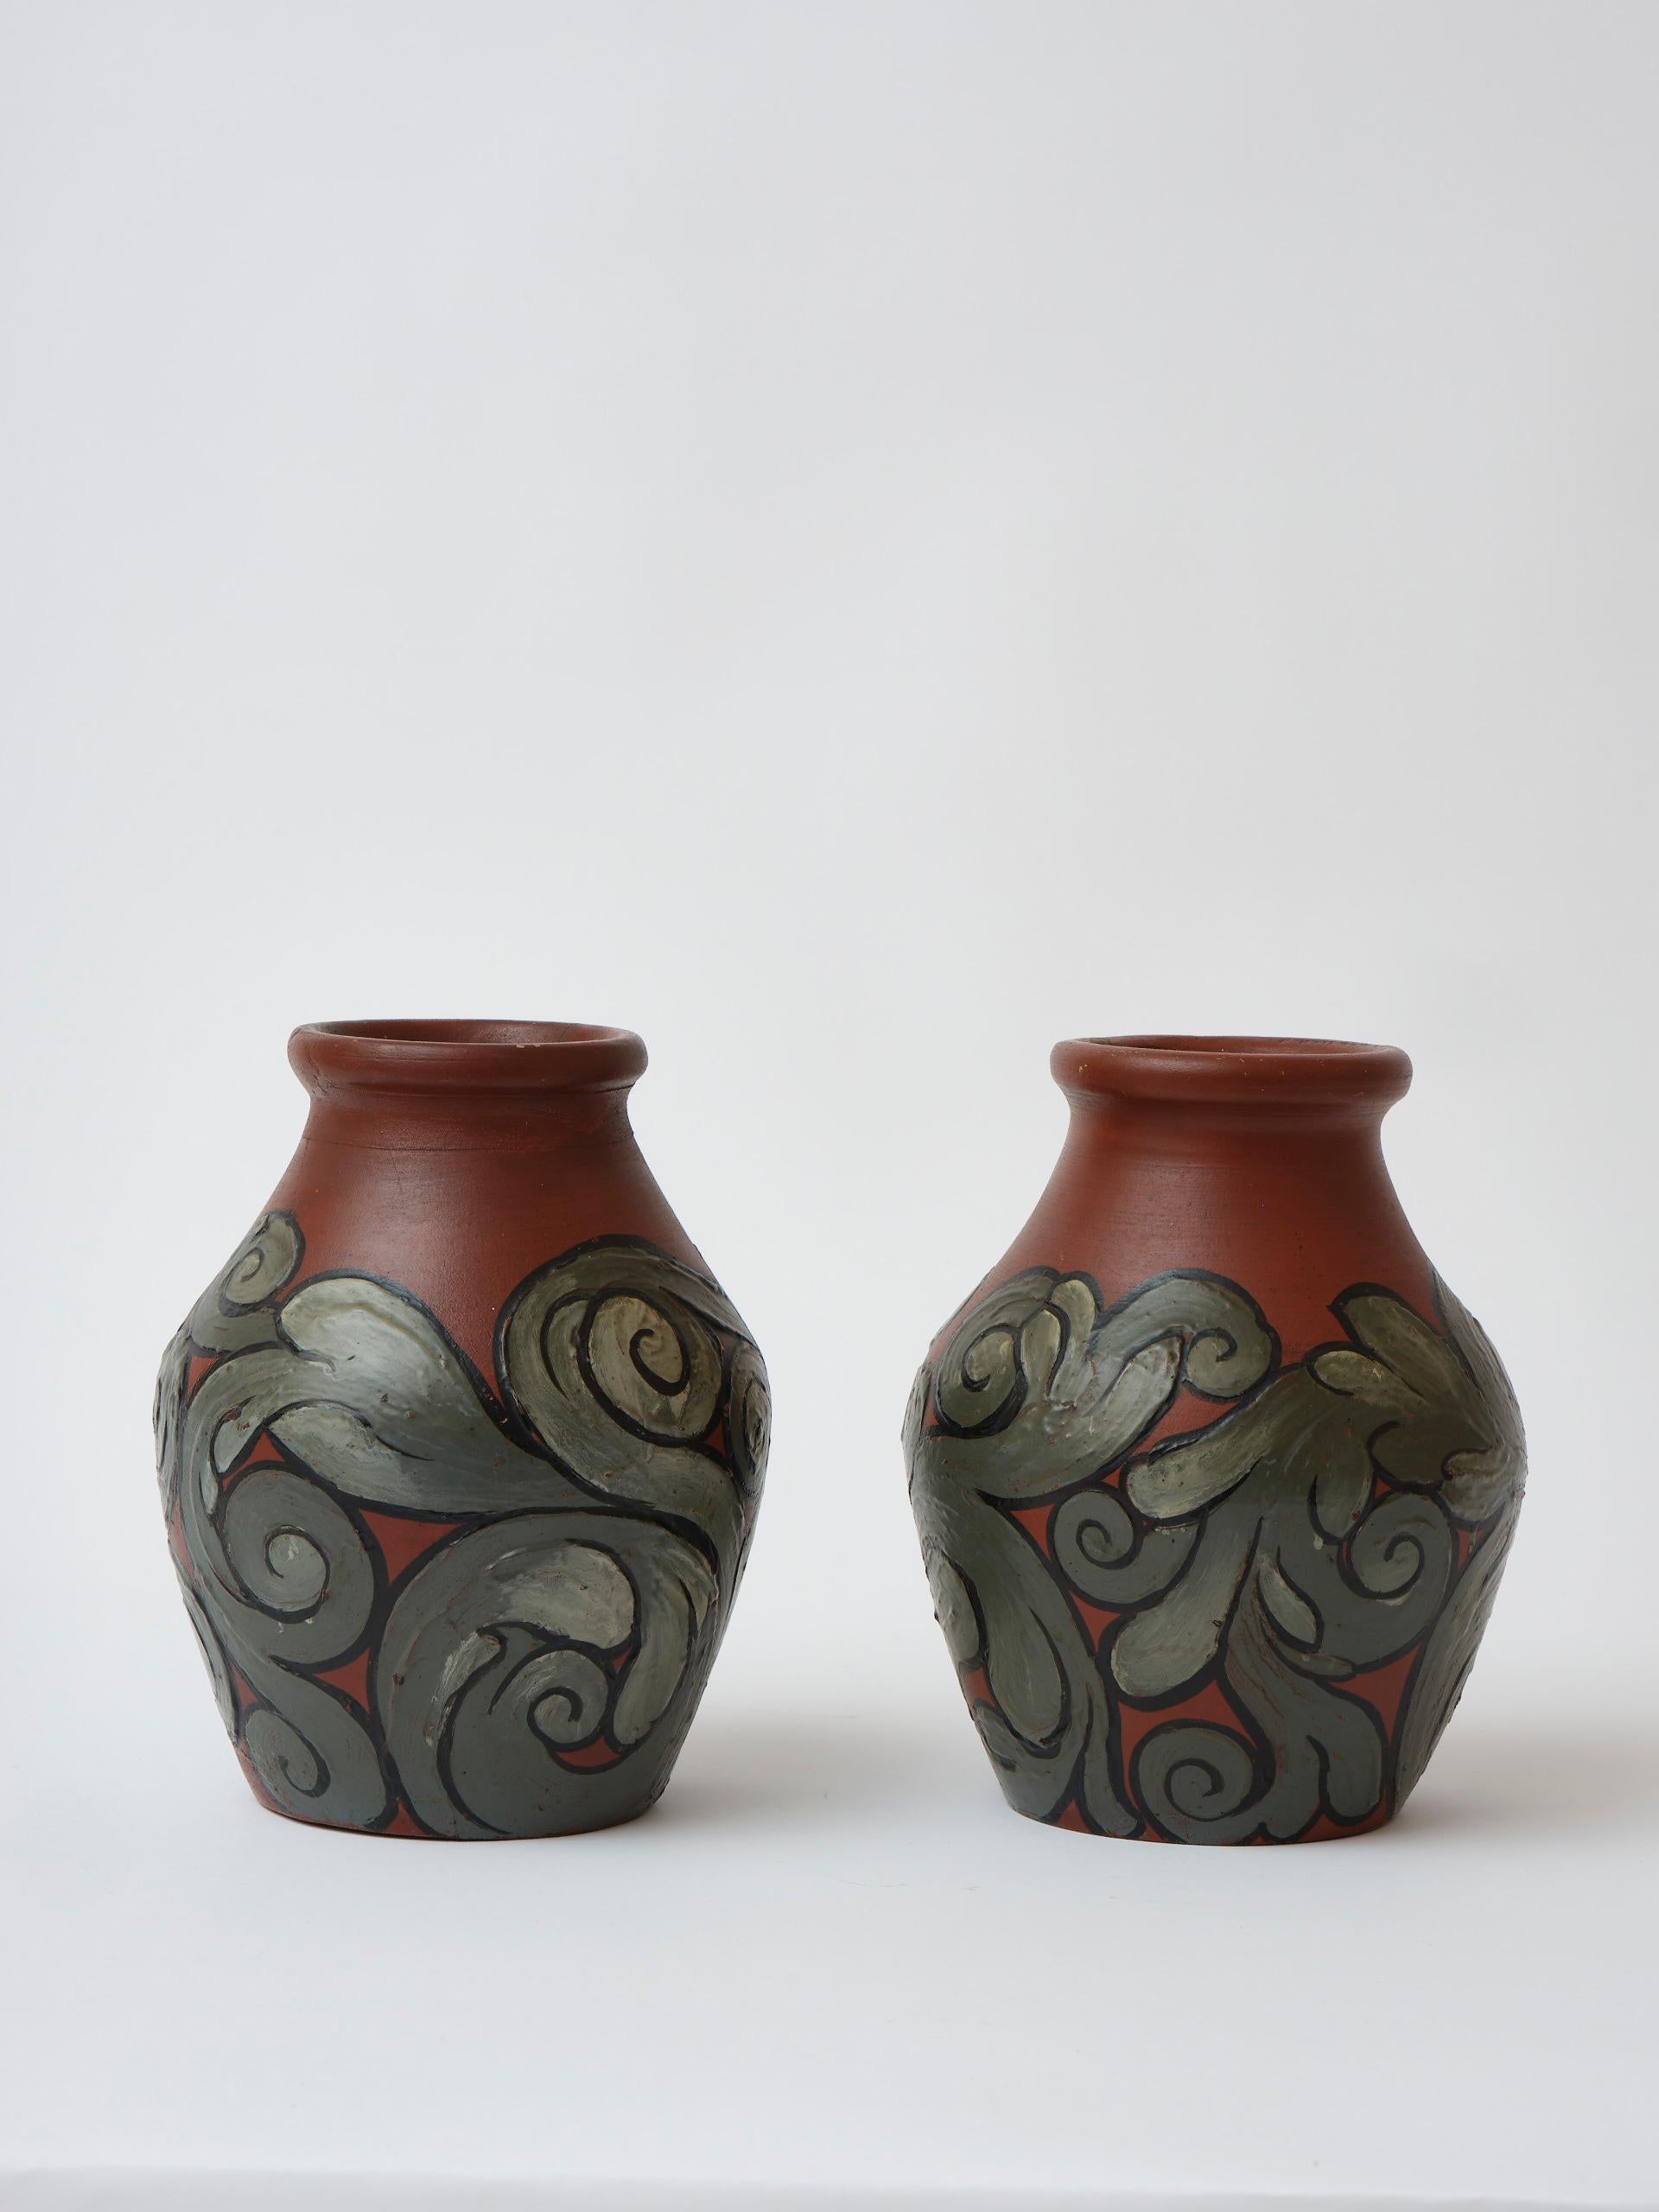 Amazing and unique pair of Danish hand made earthenware vases in Art Nouveau style with ‘Skønvirke’ (Arts & Crafts) decorations in earthy tones. 
When examining the vases close up you will see that, though shaped and decorated the same way, they are